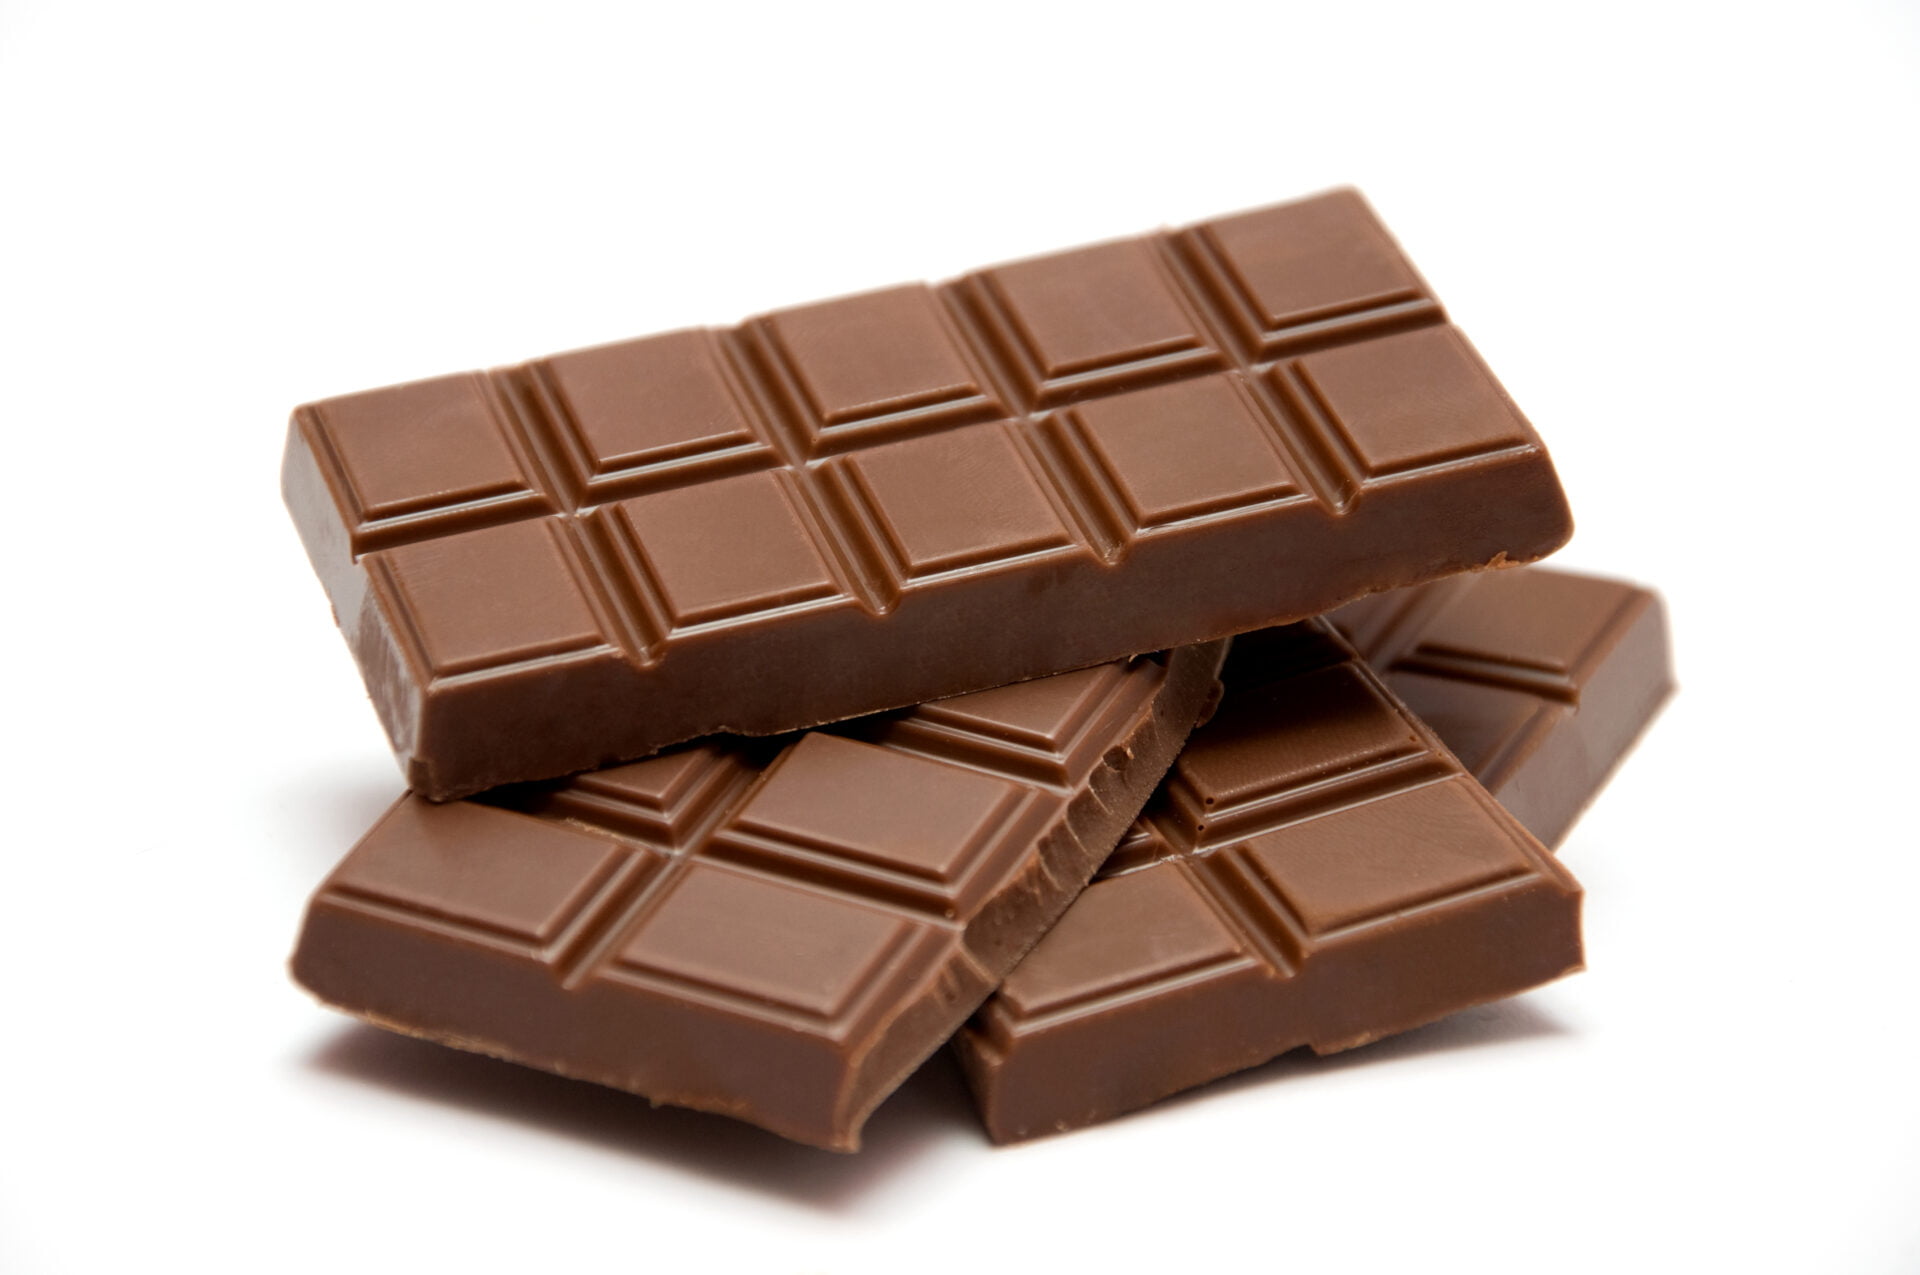 slices of chocolate bar without titanium dioxide